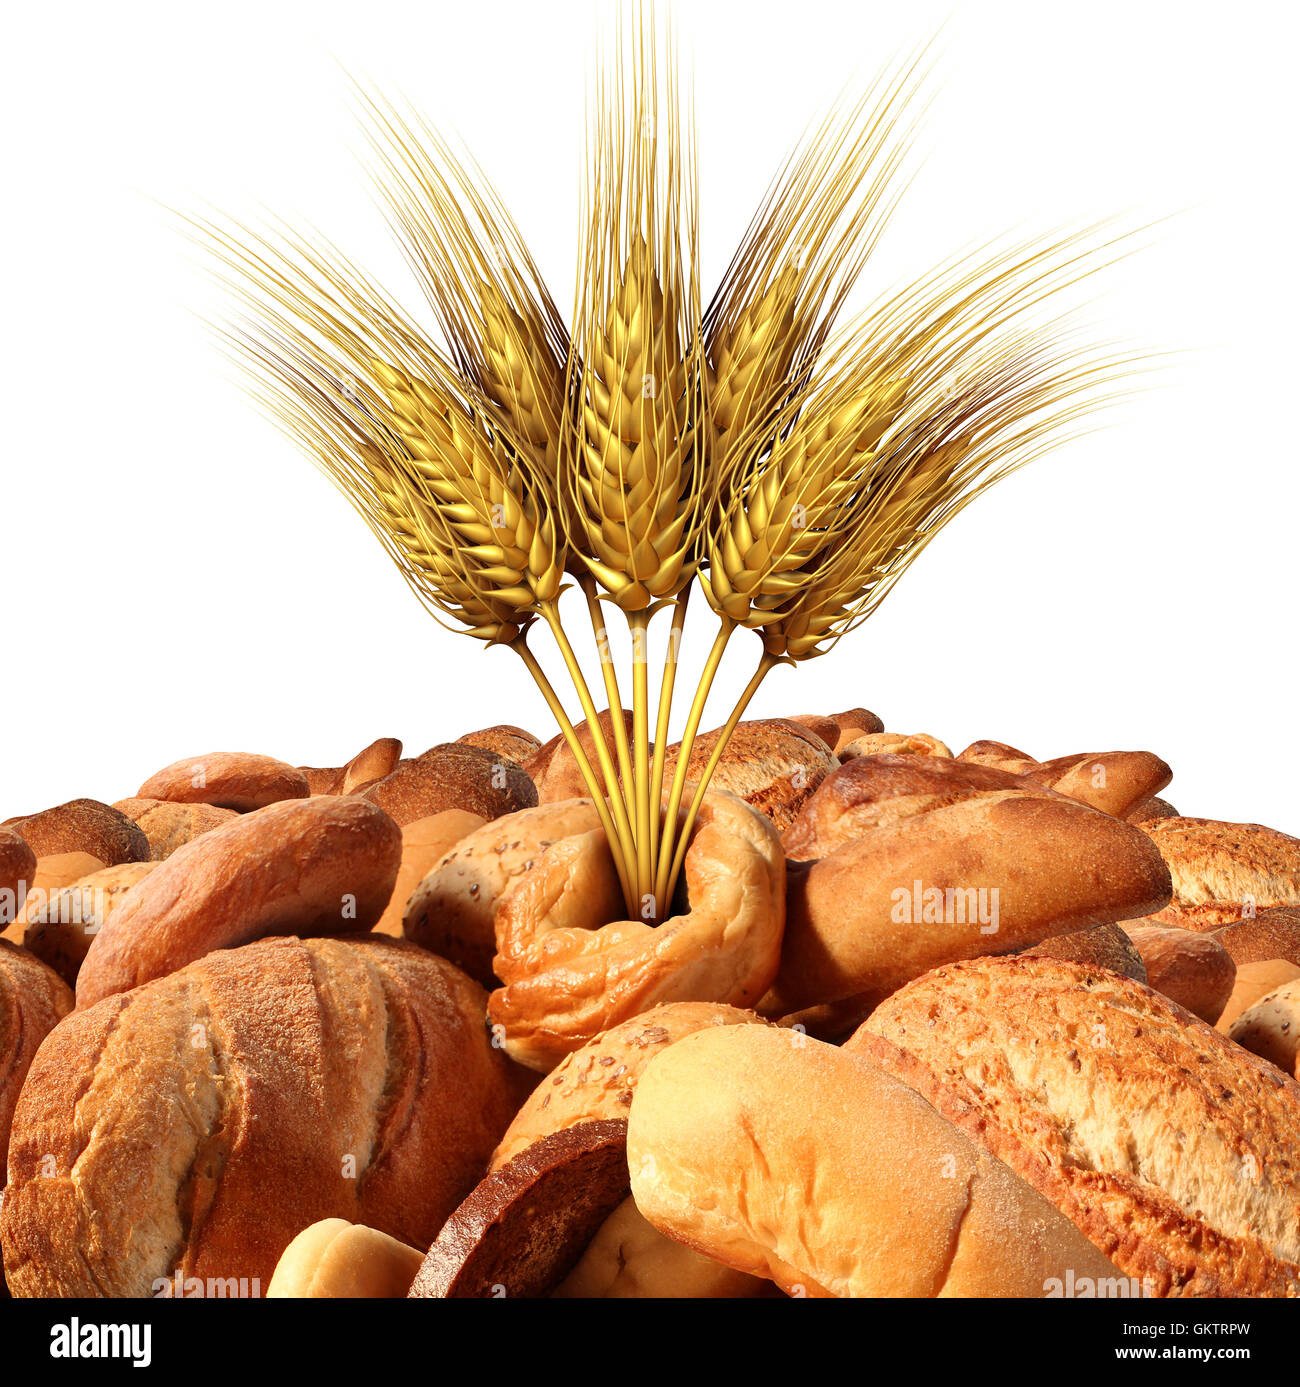 Wheat and bread with a variety of fresh baked goods with natural grains and oats as a food and agricultural symbol with 3D illustration elements isolated on a white background. Stock Photo